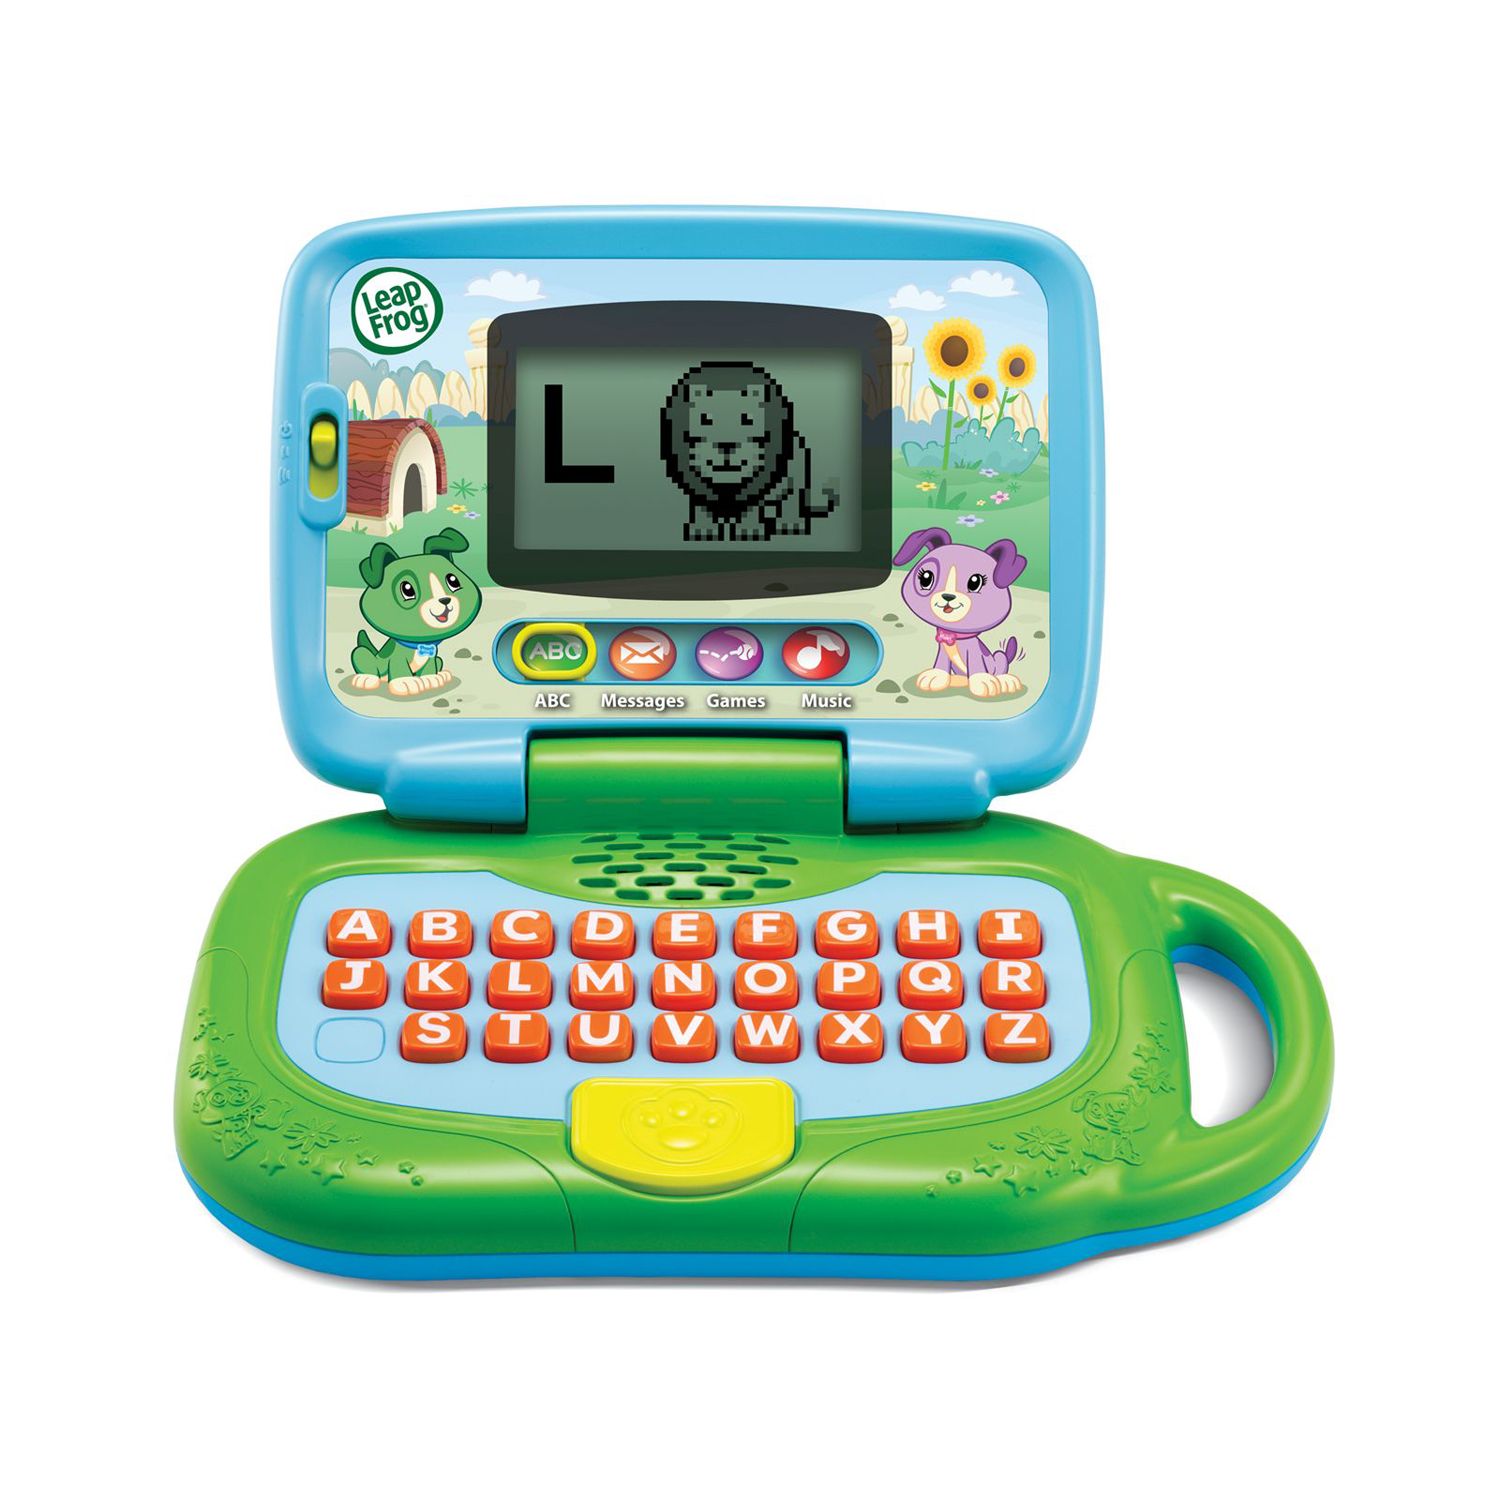 leappad for 4 year old